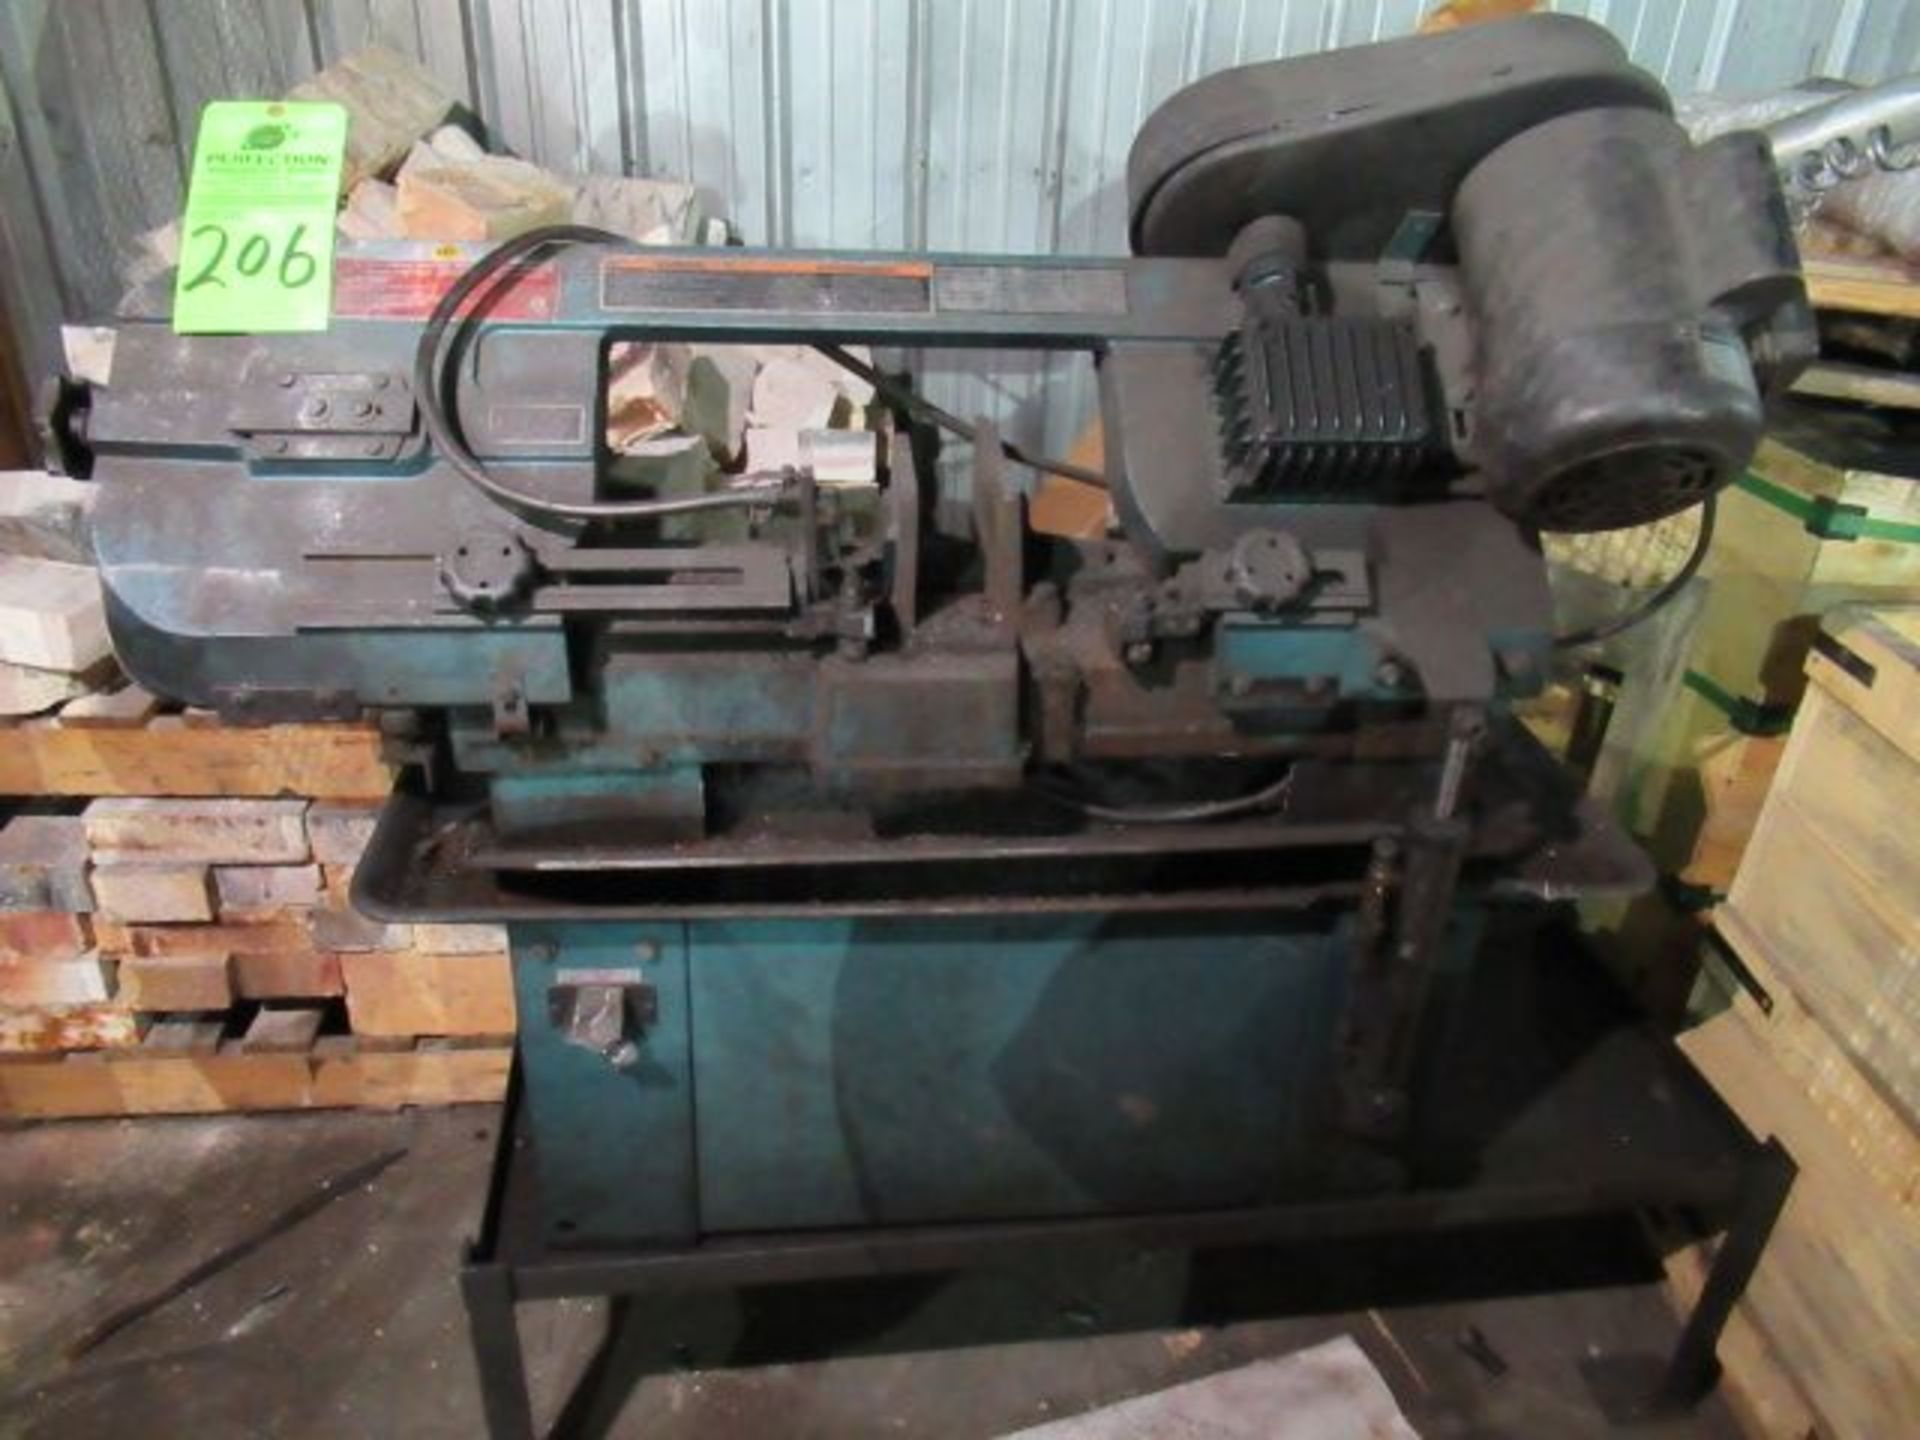 ITC 7 x 12" Horizontal-Vertical Cutting Bandsaw 120/240 V., s/n 028033 ($75 Rigging Cost)